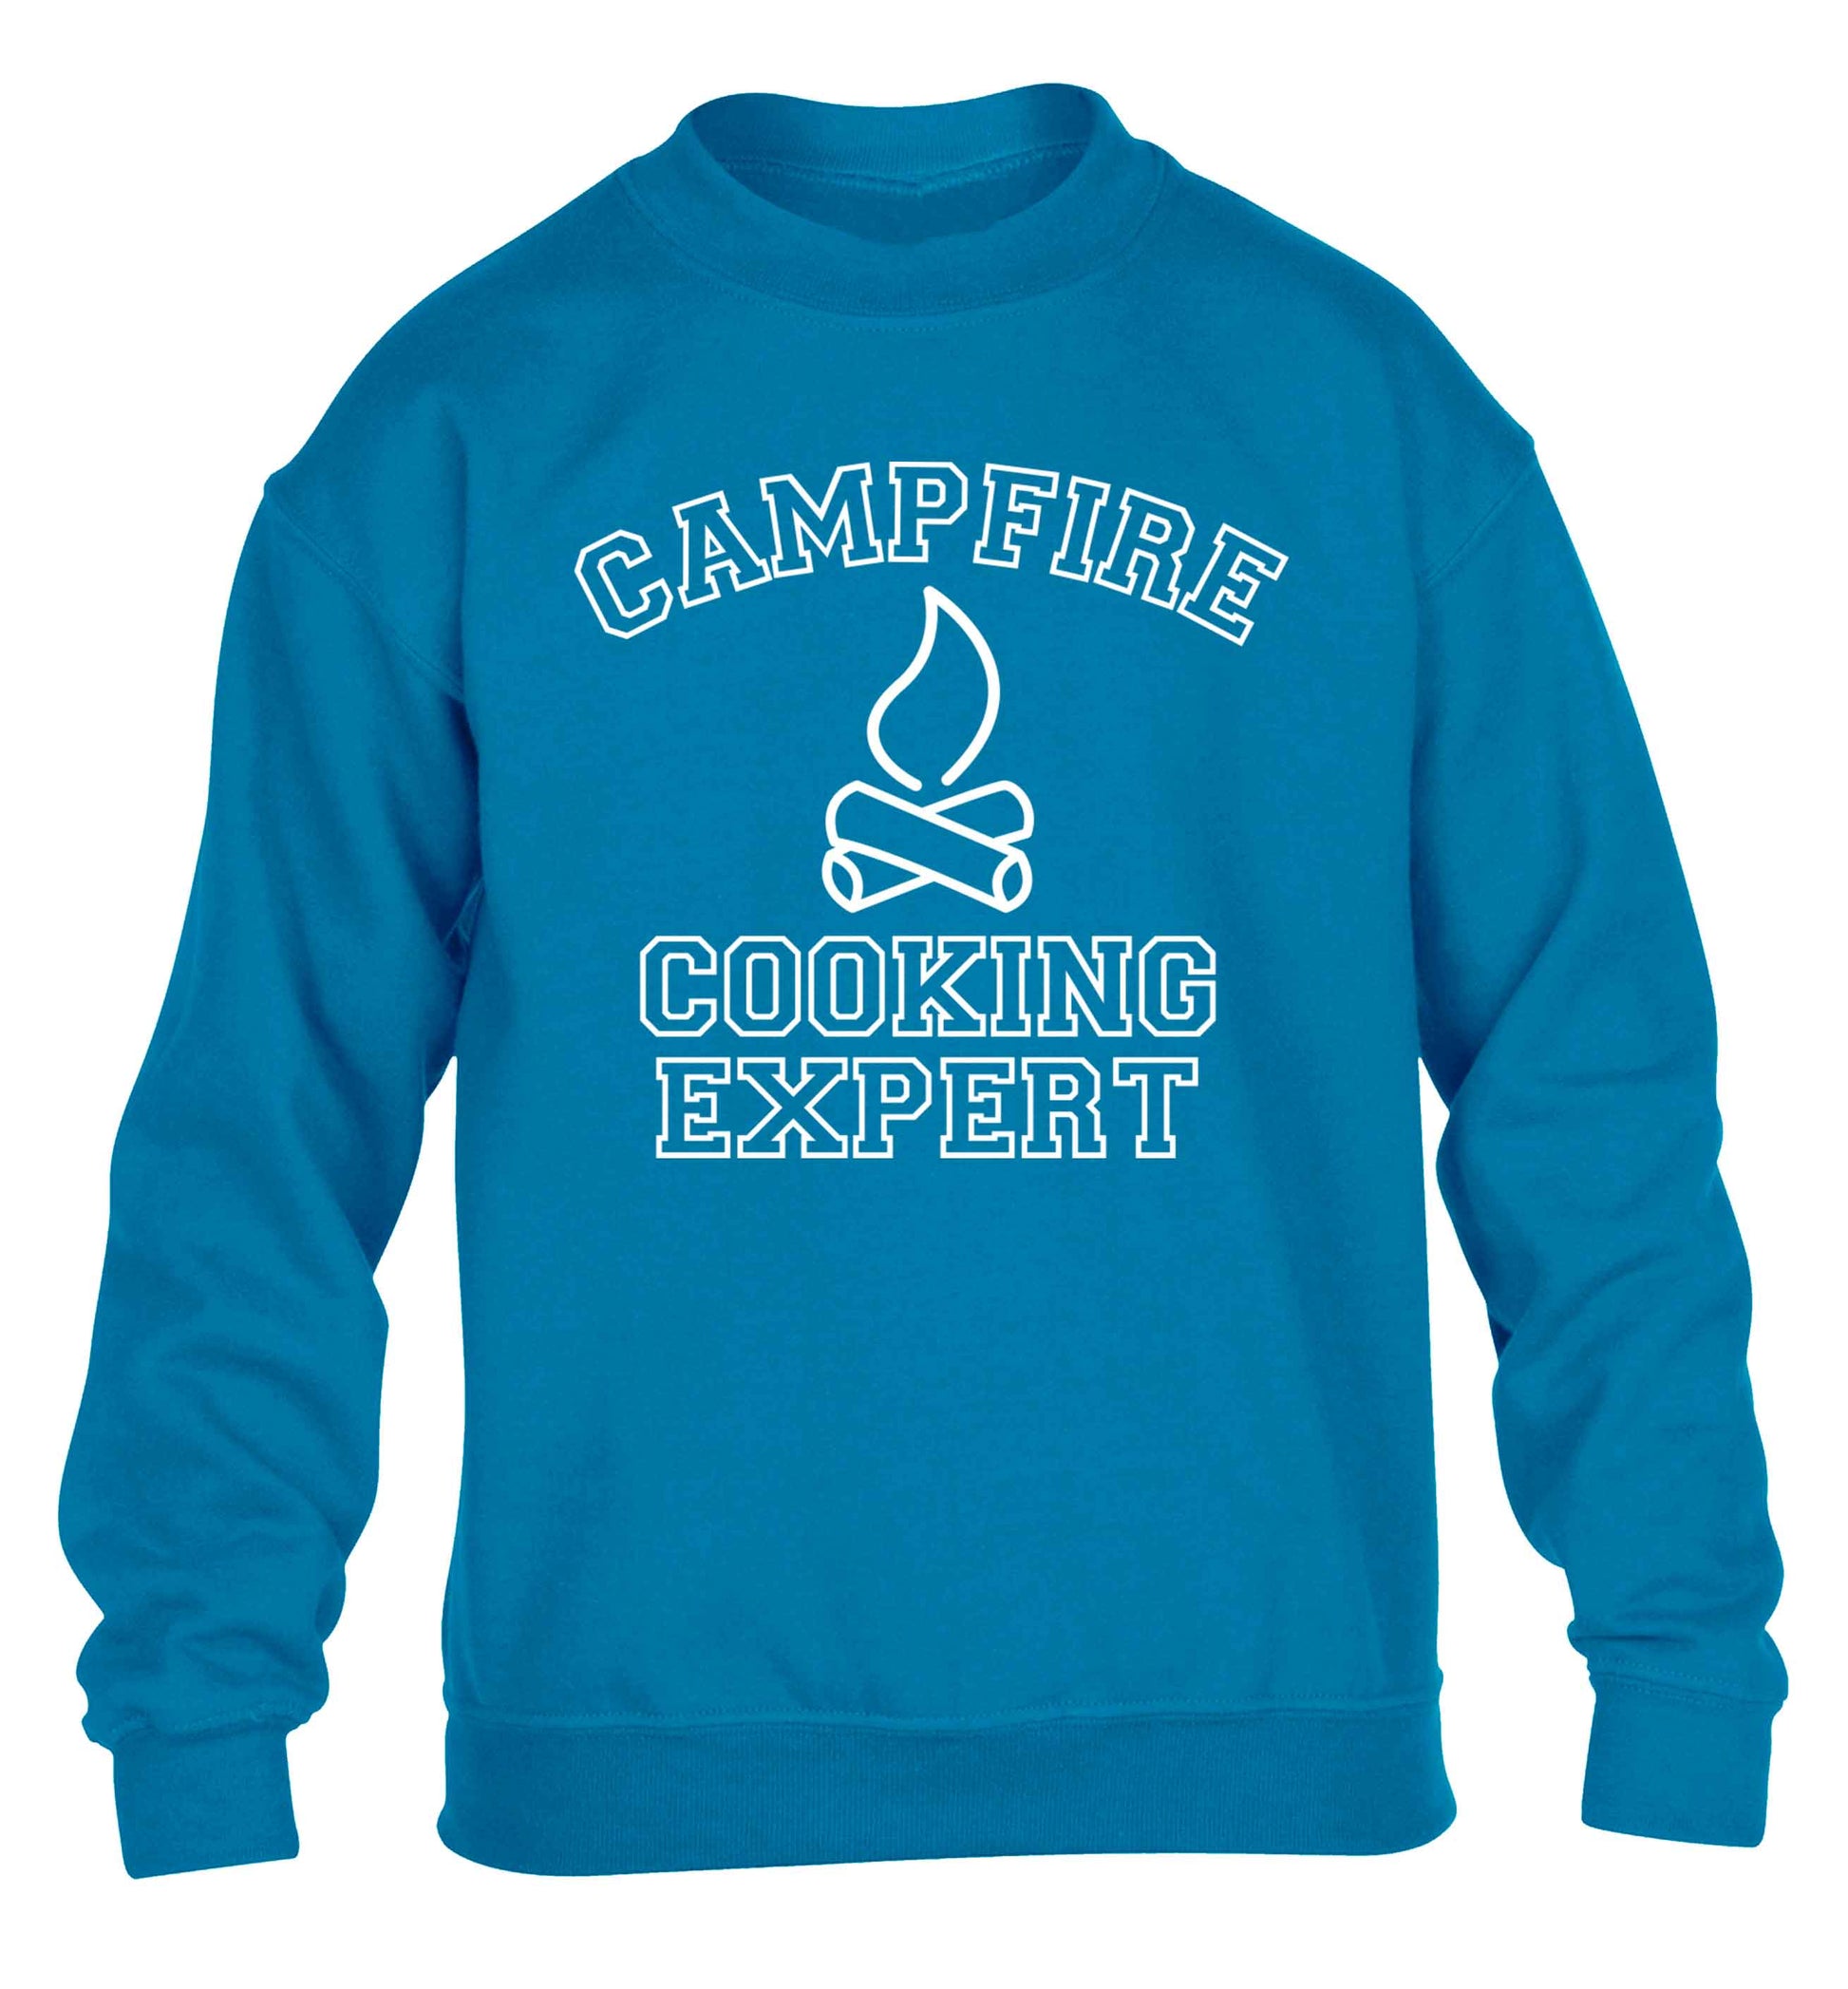 Campfire cooking expert children's blue sweater 12-13 Years